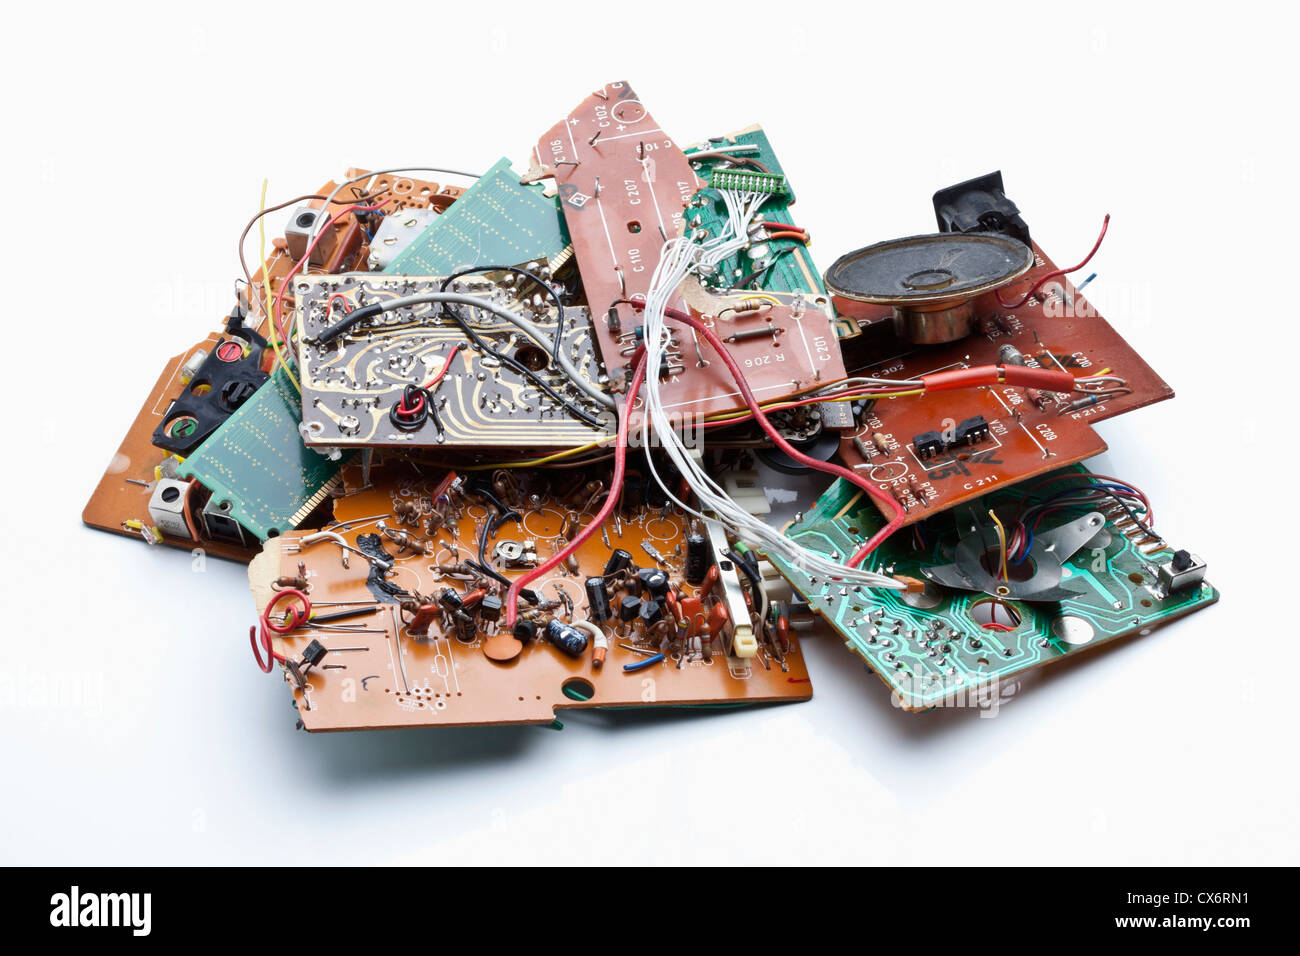 A heap of trashed computer parts Stock Photo